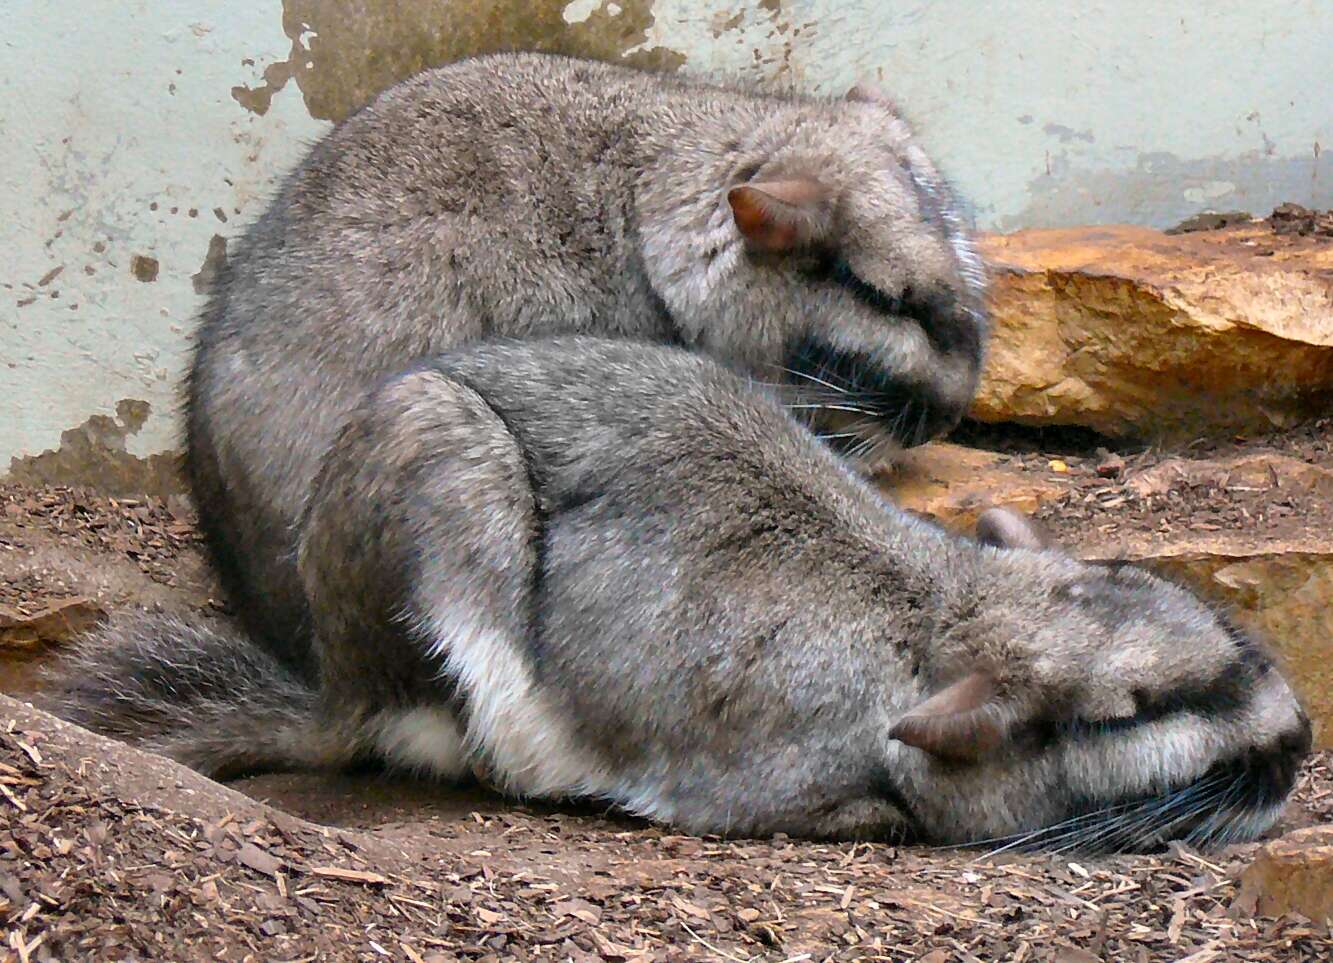 Image of chinchillas and viscachas